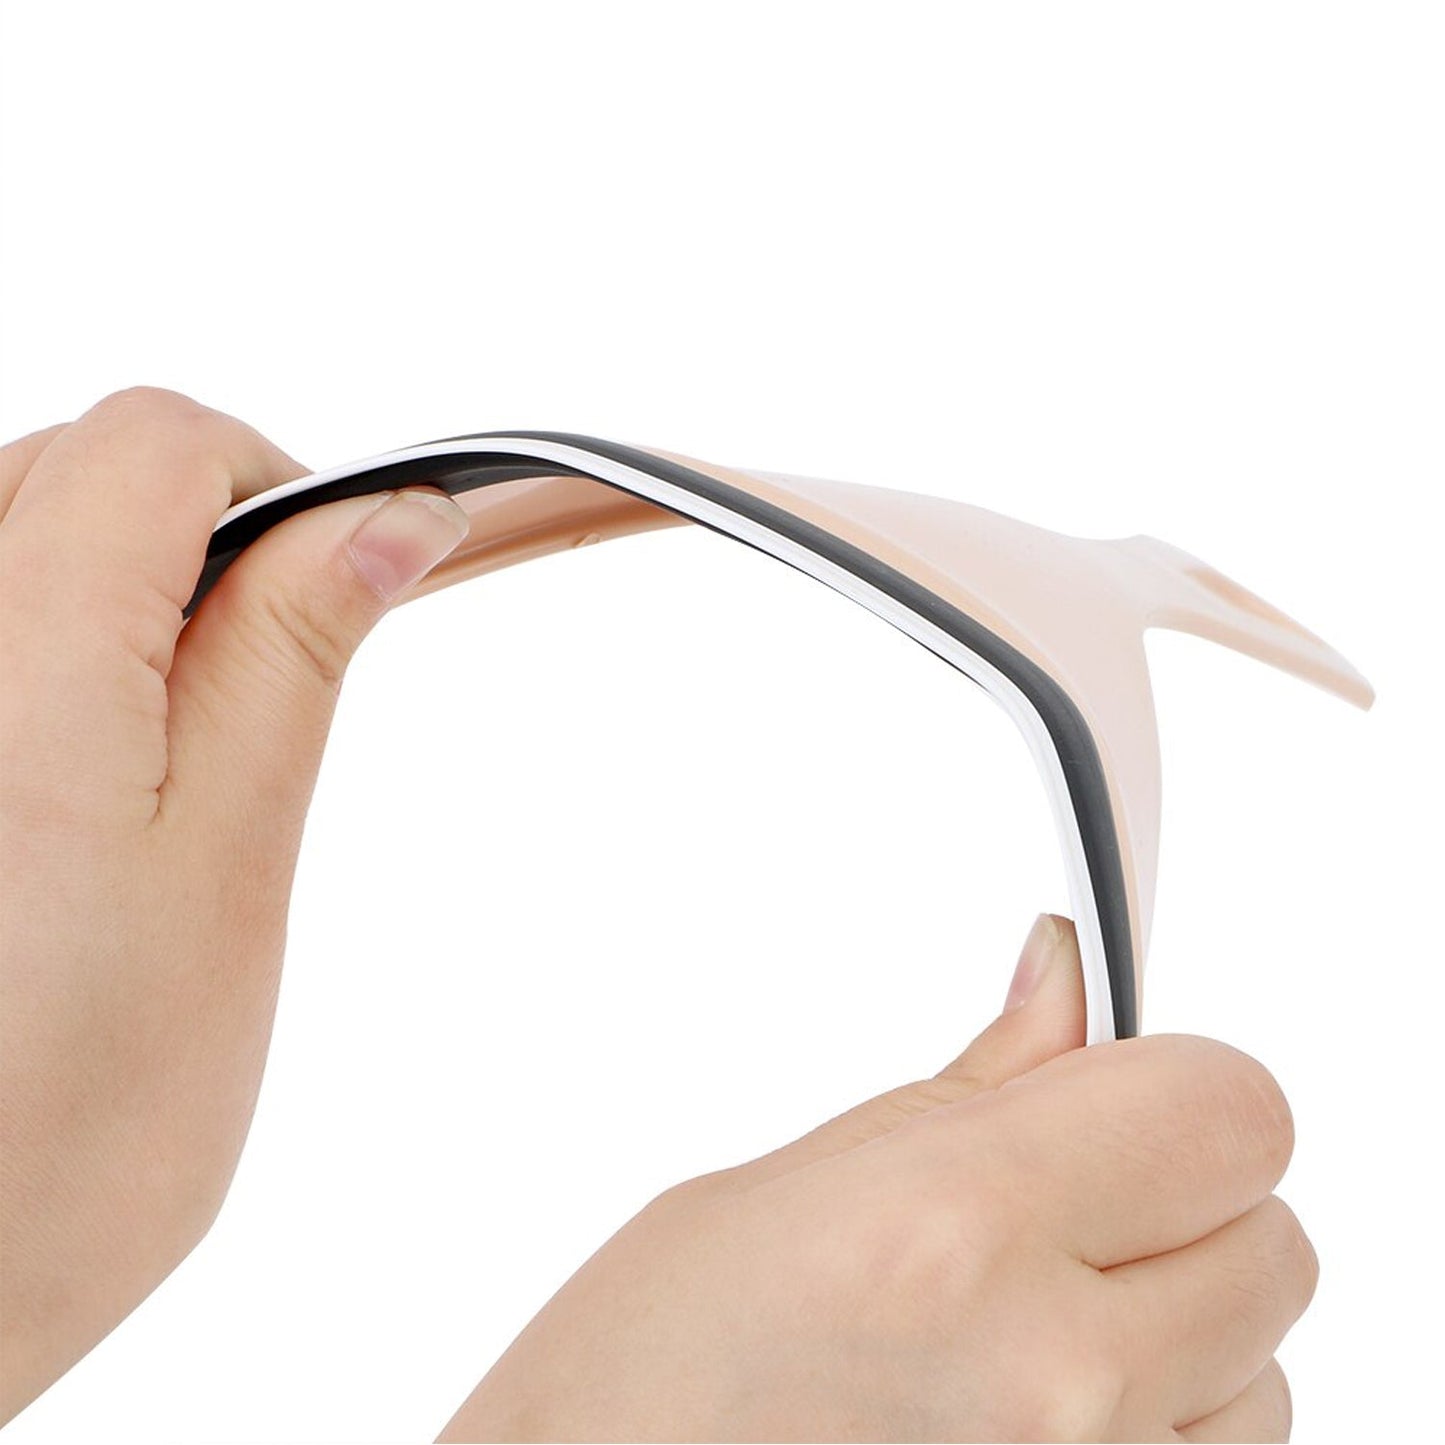 Car Mirror Wiper used for cars and vehicles for cleaning and wiping off mirror